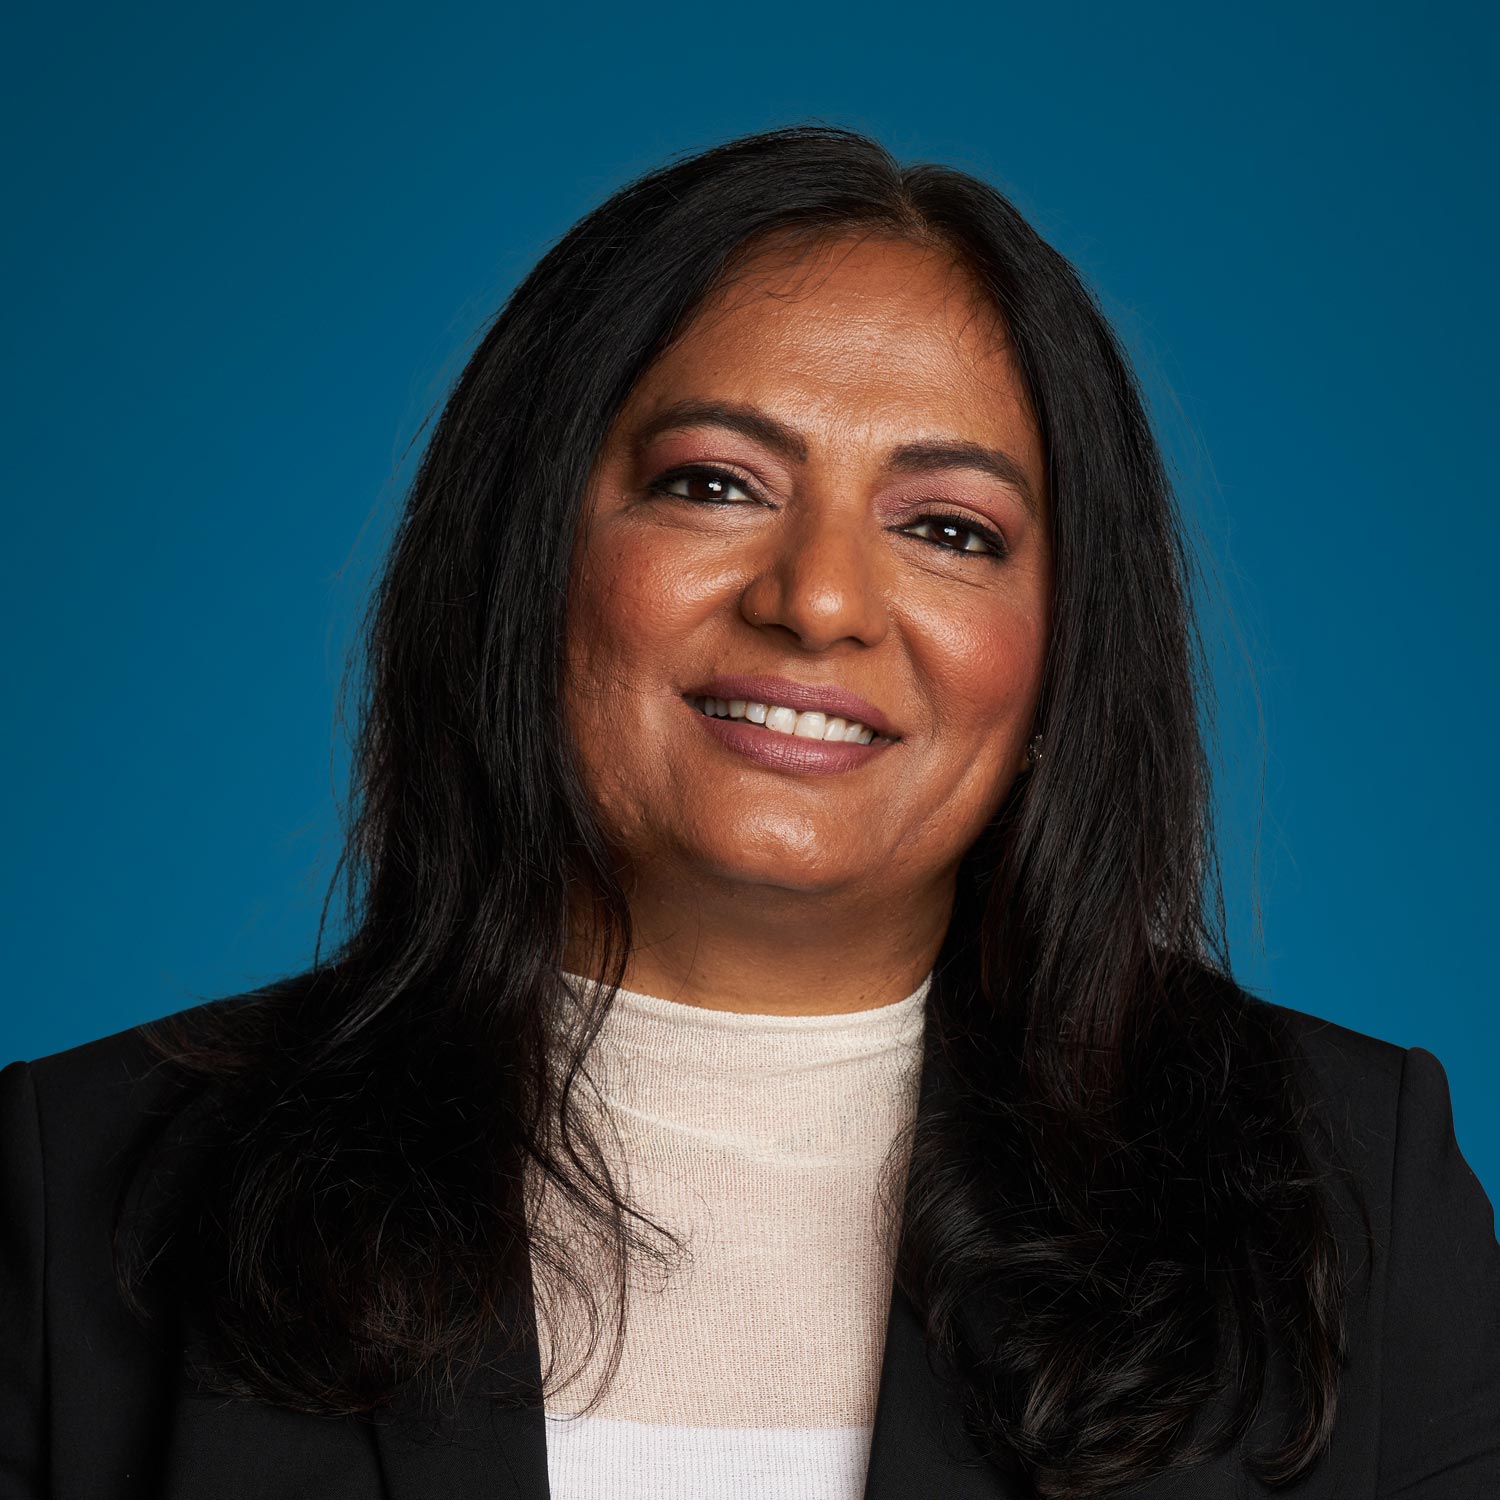 Portrait of Aparna Rayasam, Trellix Chief Product Officer